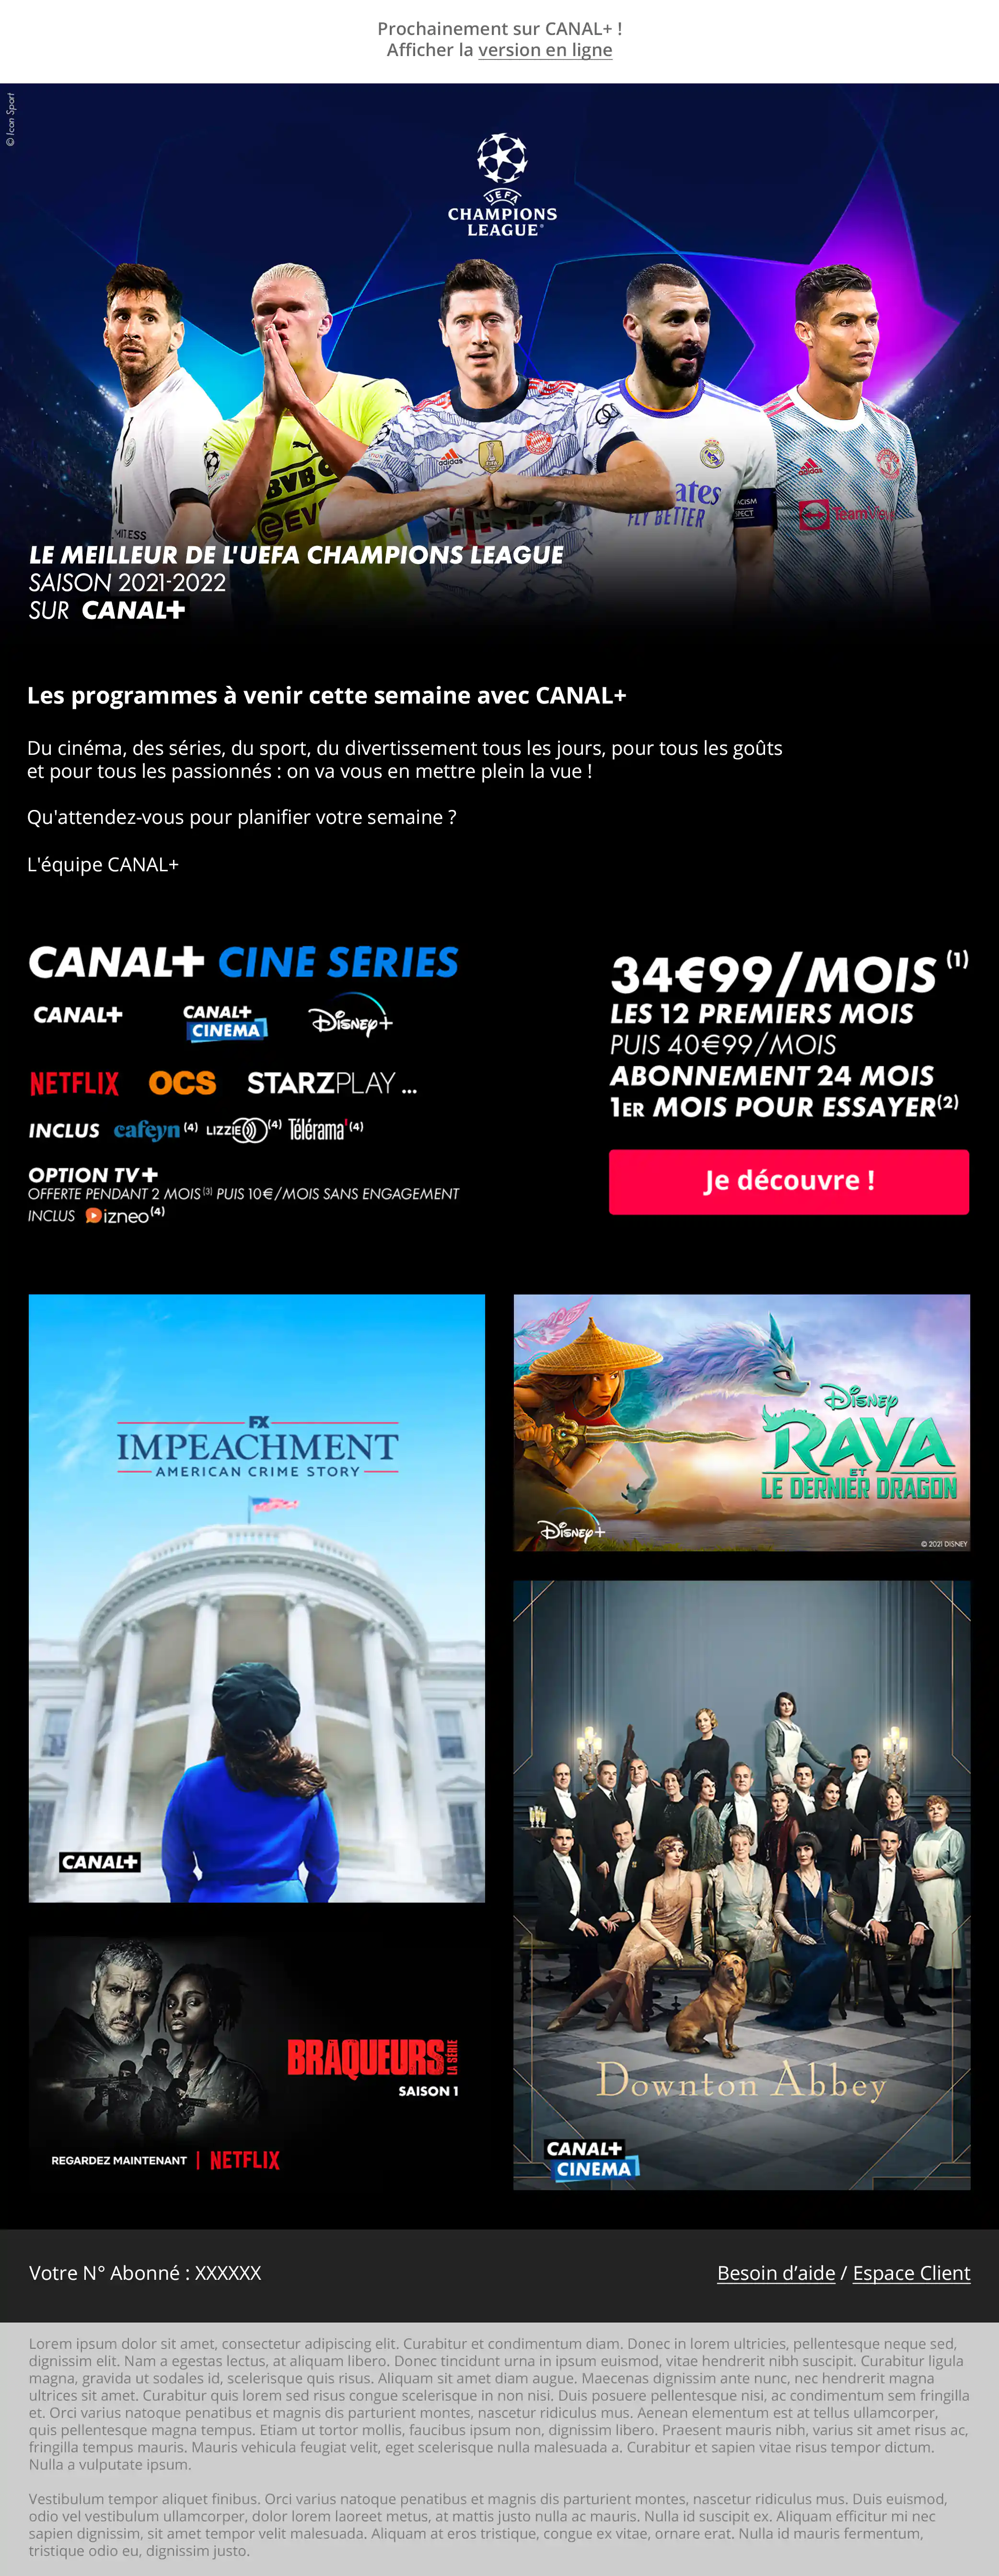 EMAIL CANAL+